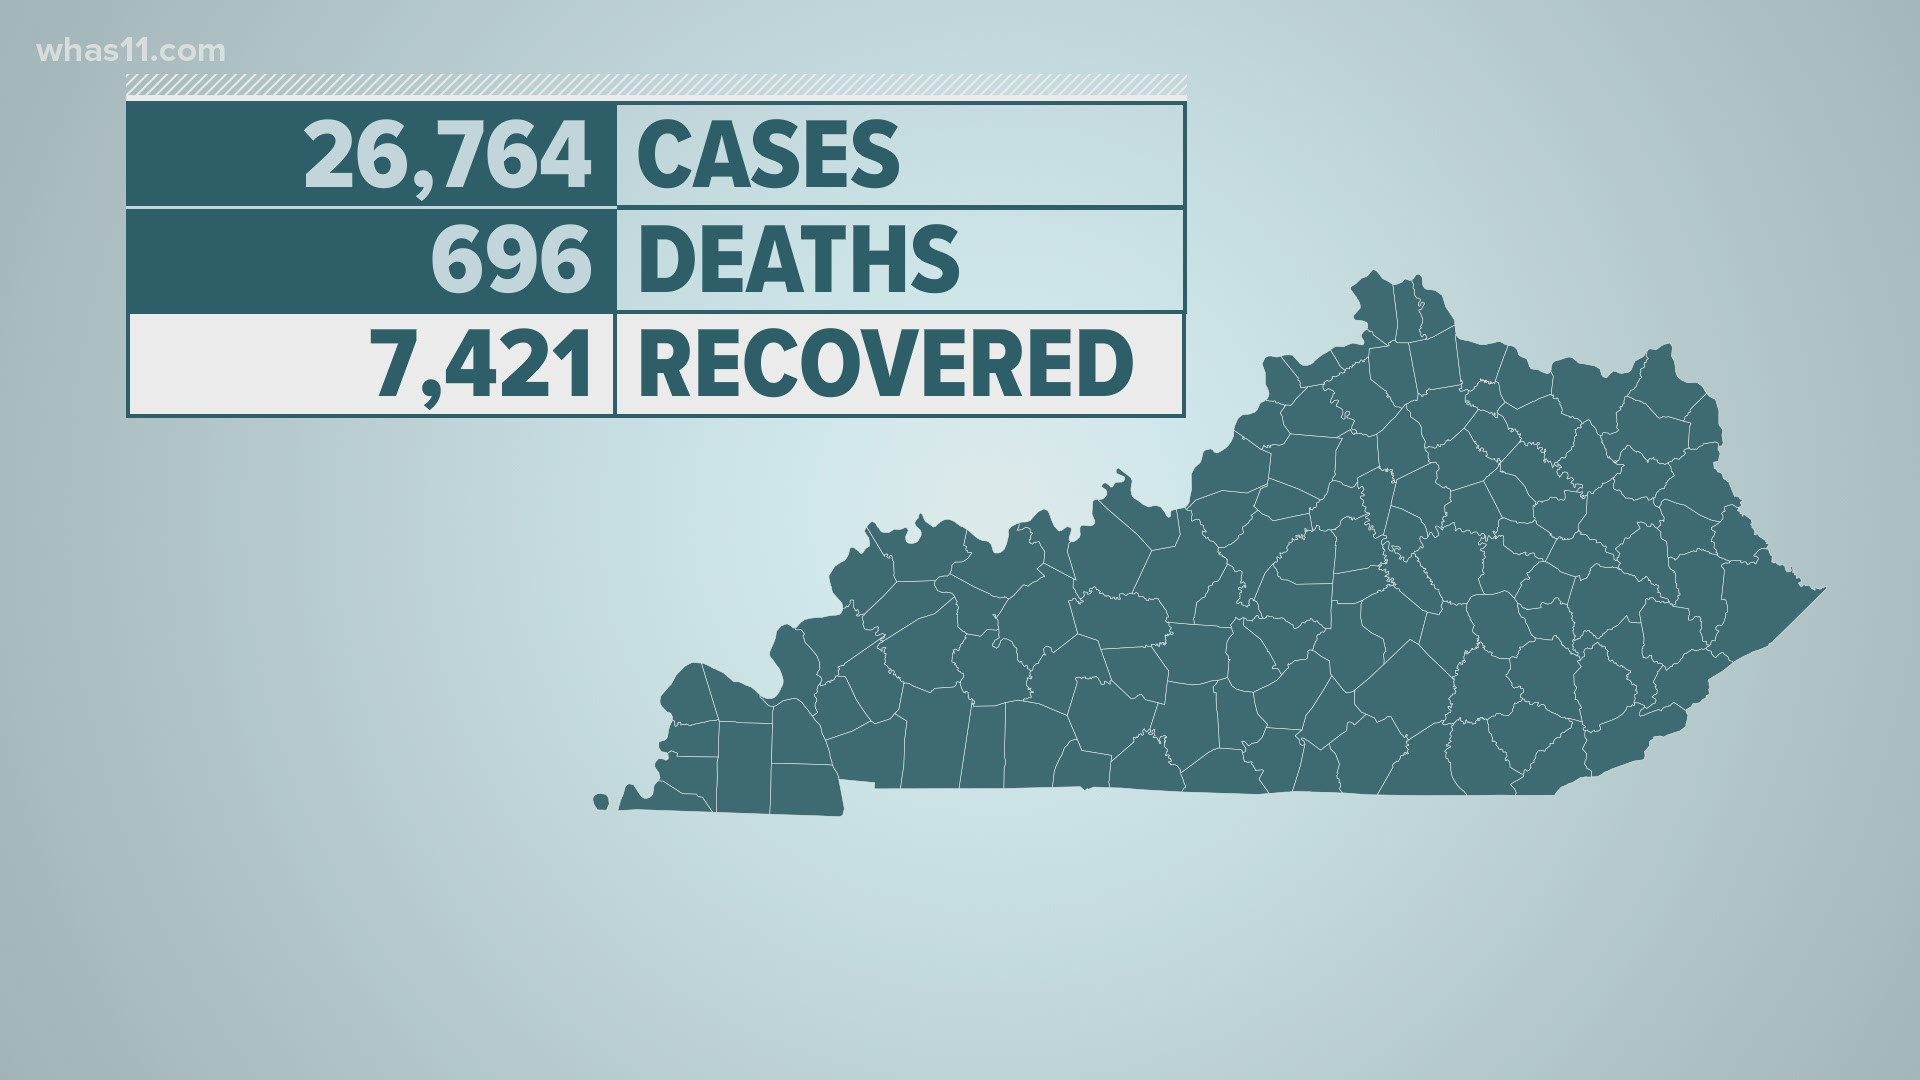 Governor Andy Beshear said the state once again hit a high total of cases in a single day.